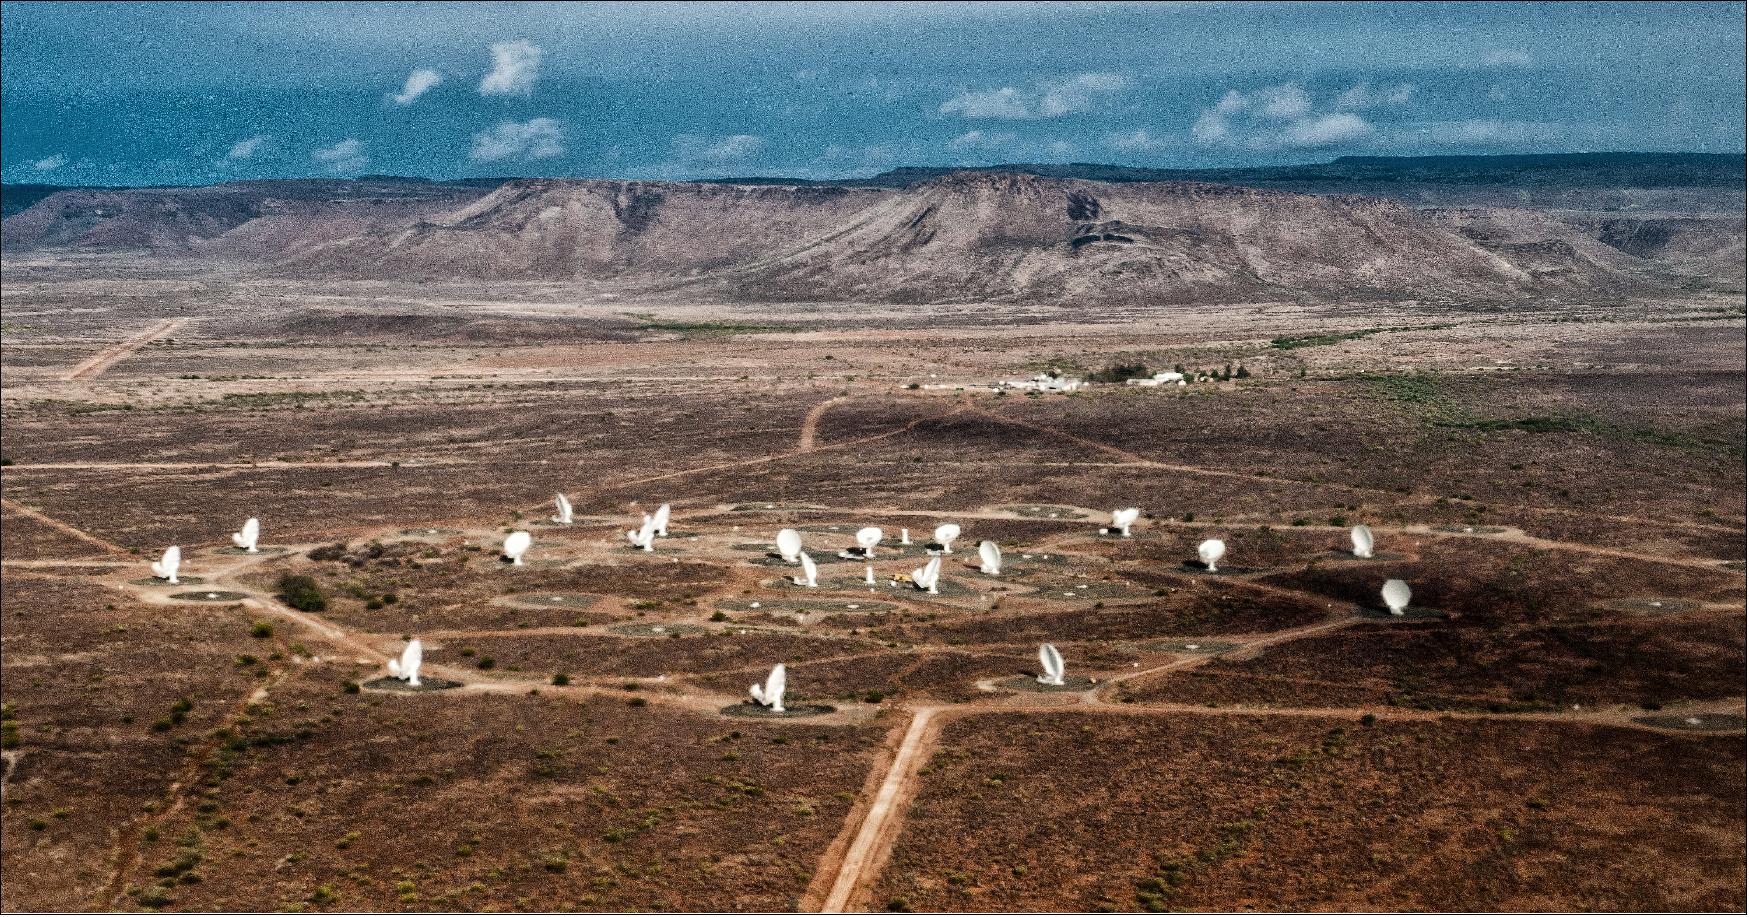 Figure 62: In 2016, more than 20 MeerKAT antennas have been installed on the SKA SA Losberg site outside Carnarvon in the Northern Cape (image credit: SKA Africa)